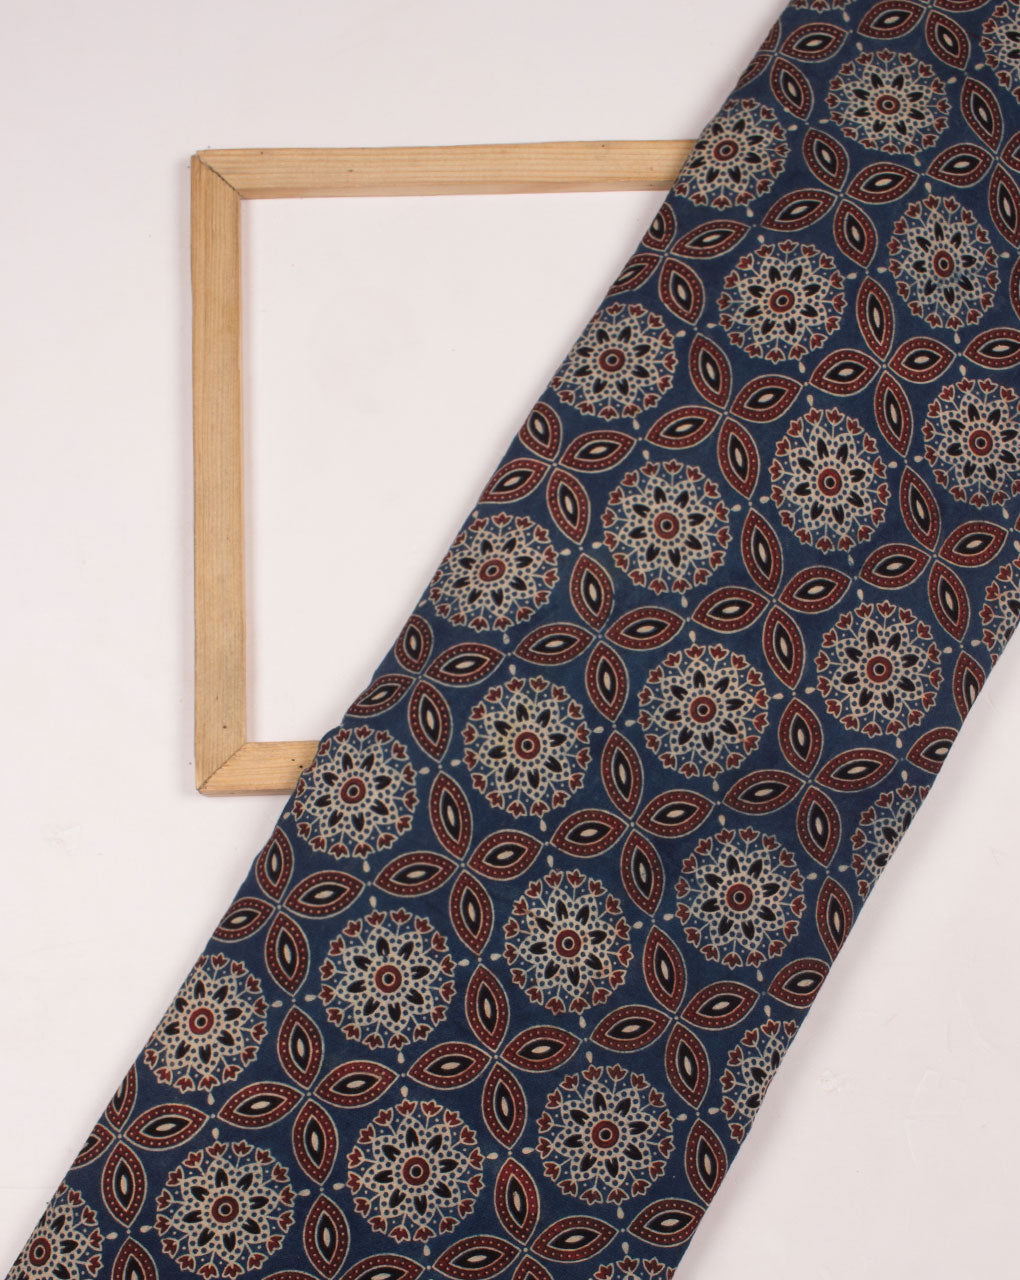 Blue Red Floral Ajrak Screen Print Natural Dye Rayon Fabric - Fabriclore.com